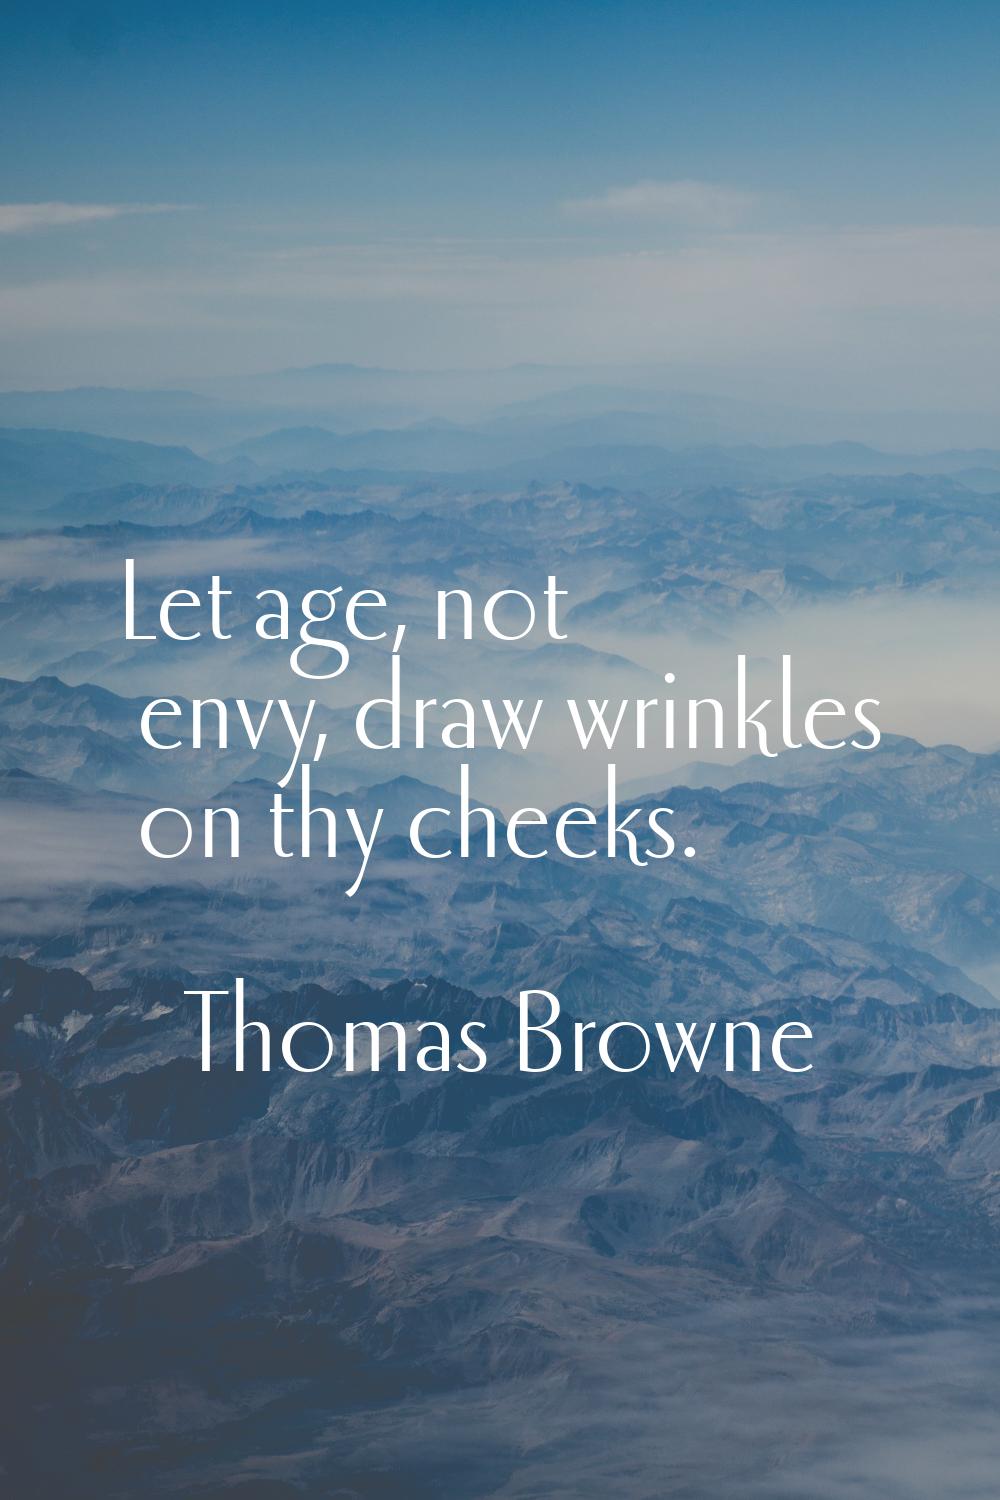 Let age, not envy, draw wrinkles on thy cheeks.